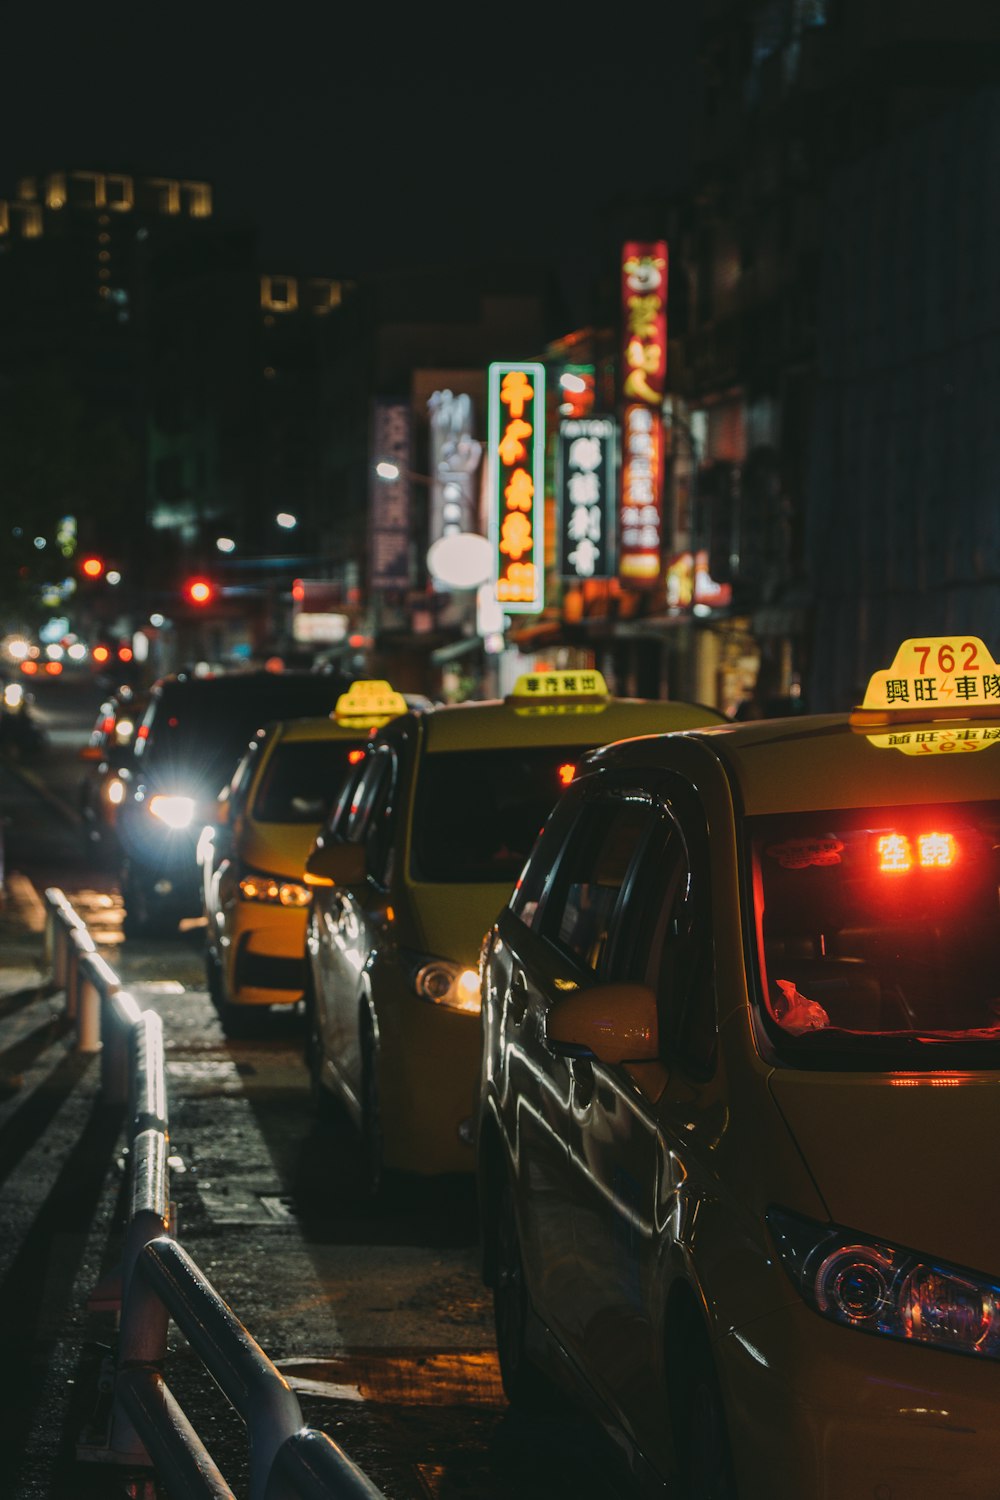 black and yellow taxi cab on road during night time